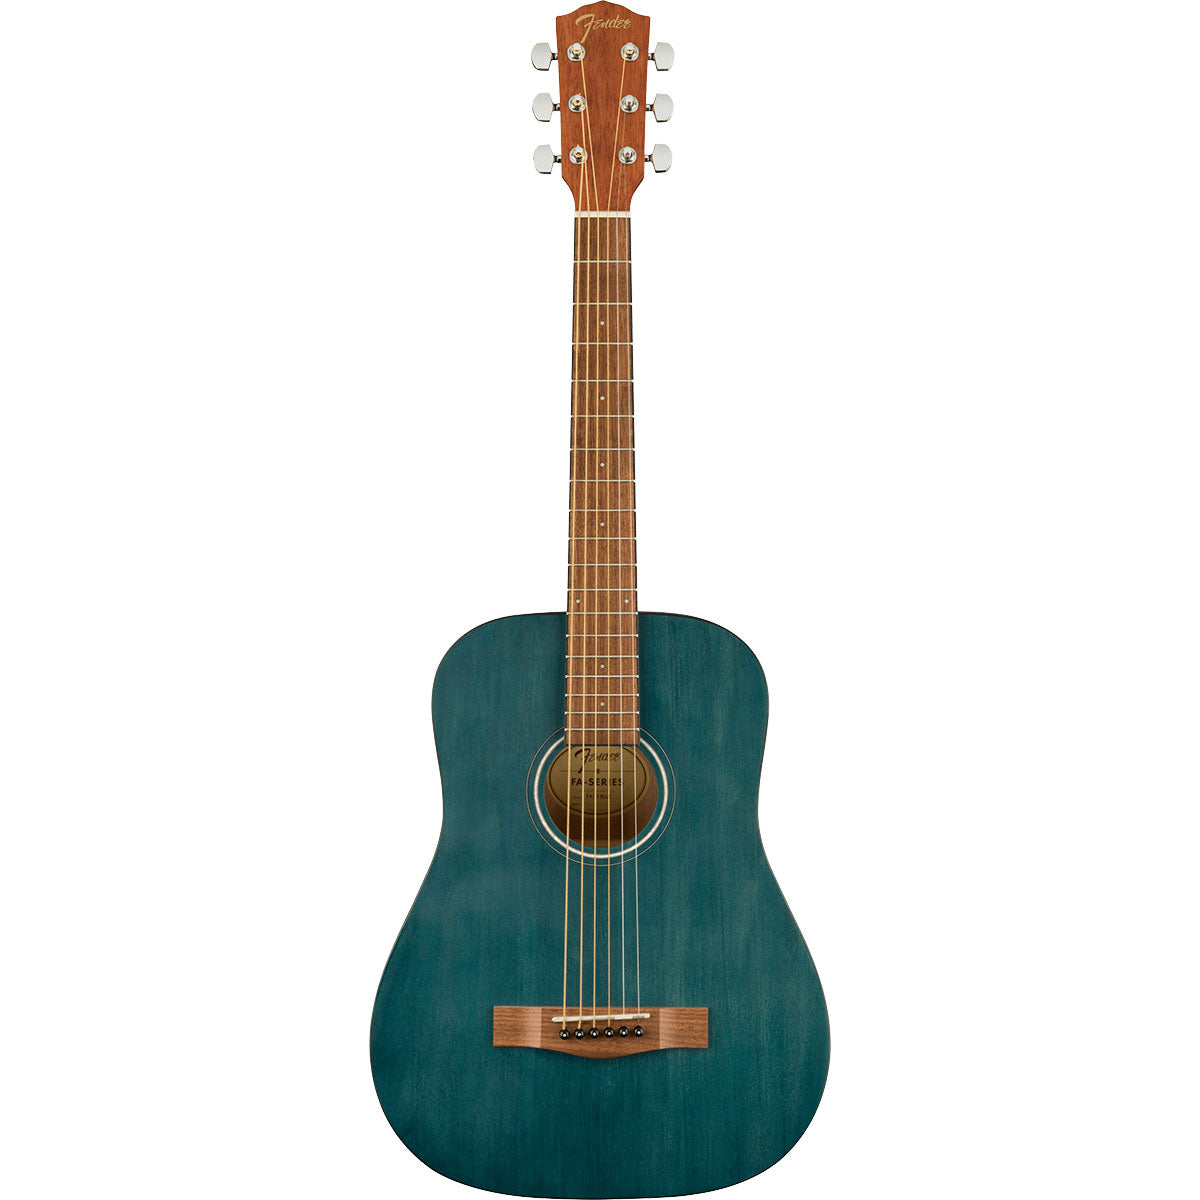 Top view of Fender FA-15 3/4 Steel Acoustic Guitar - Blue